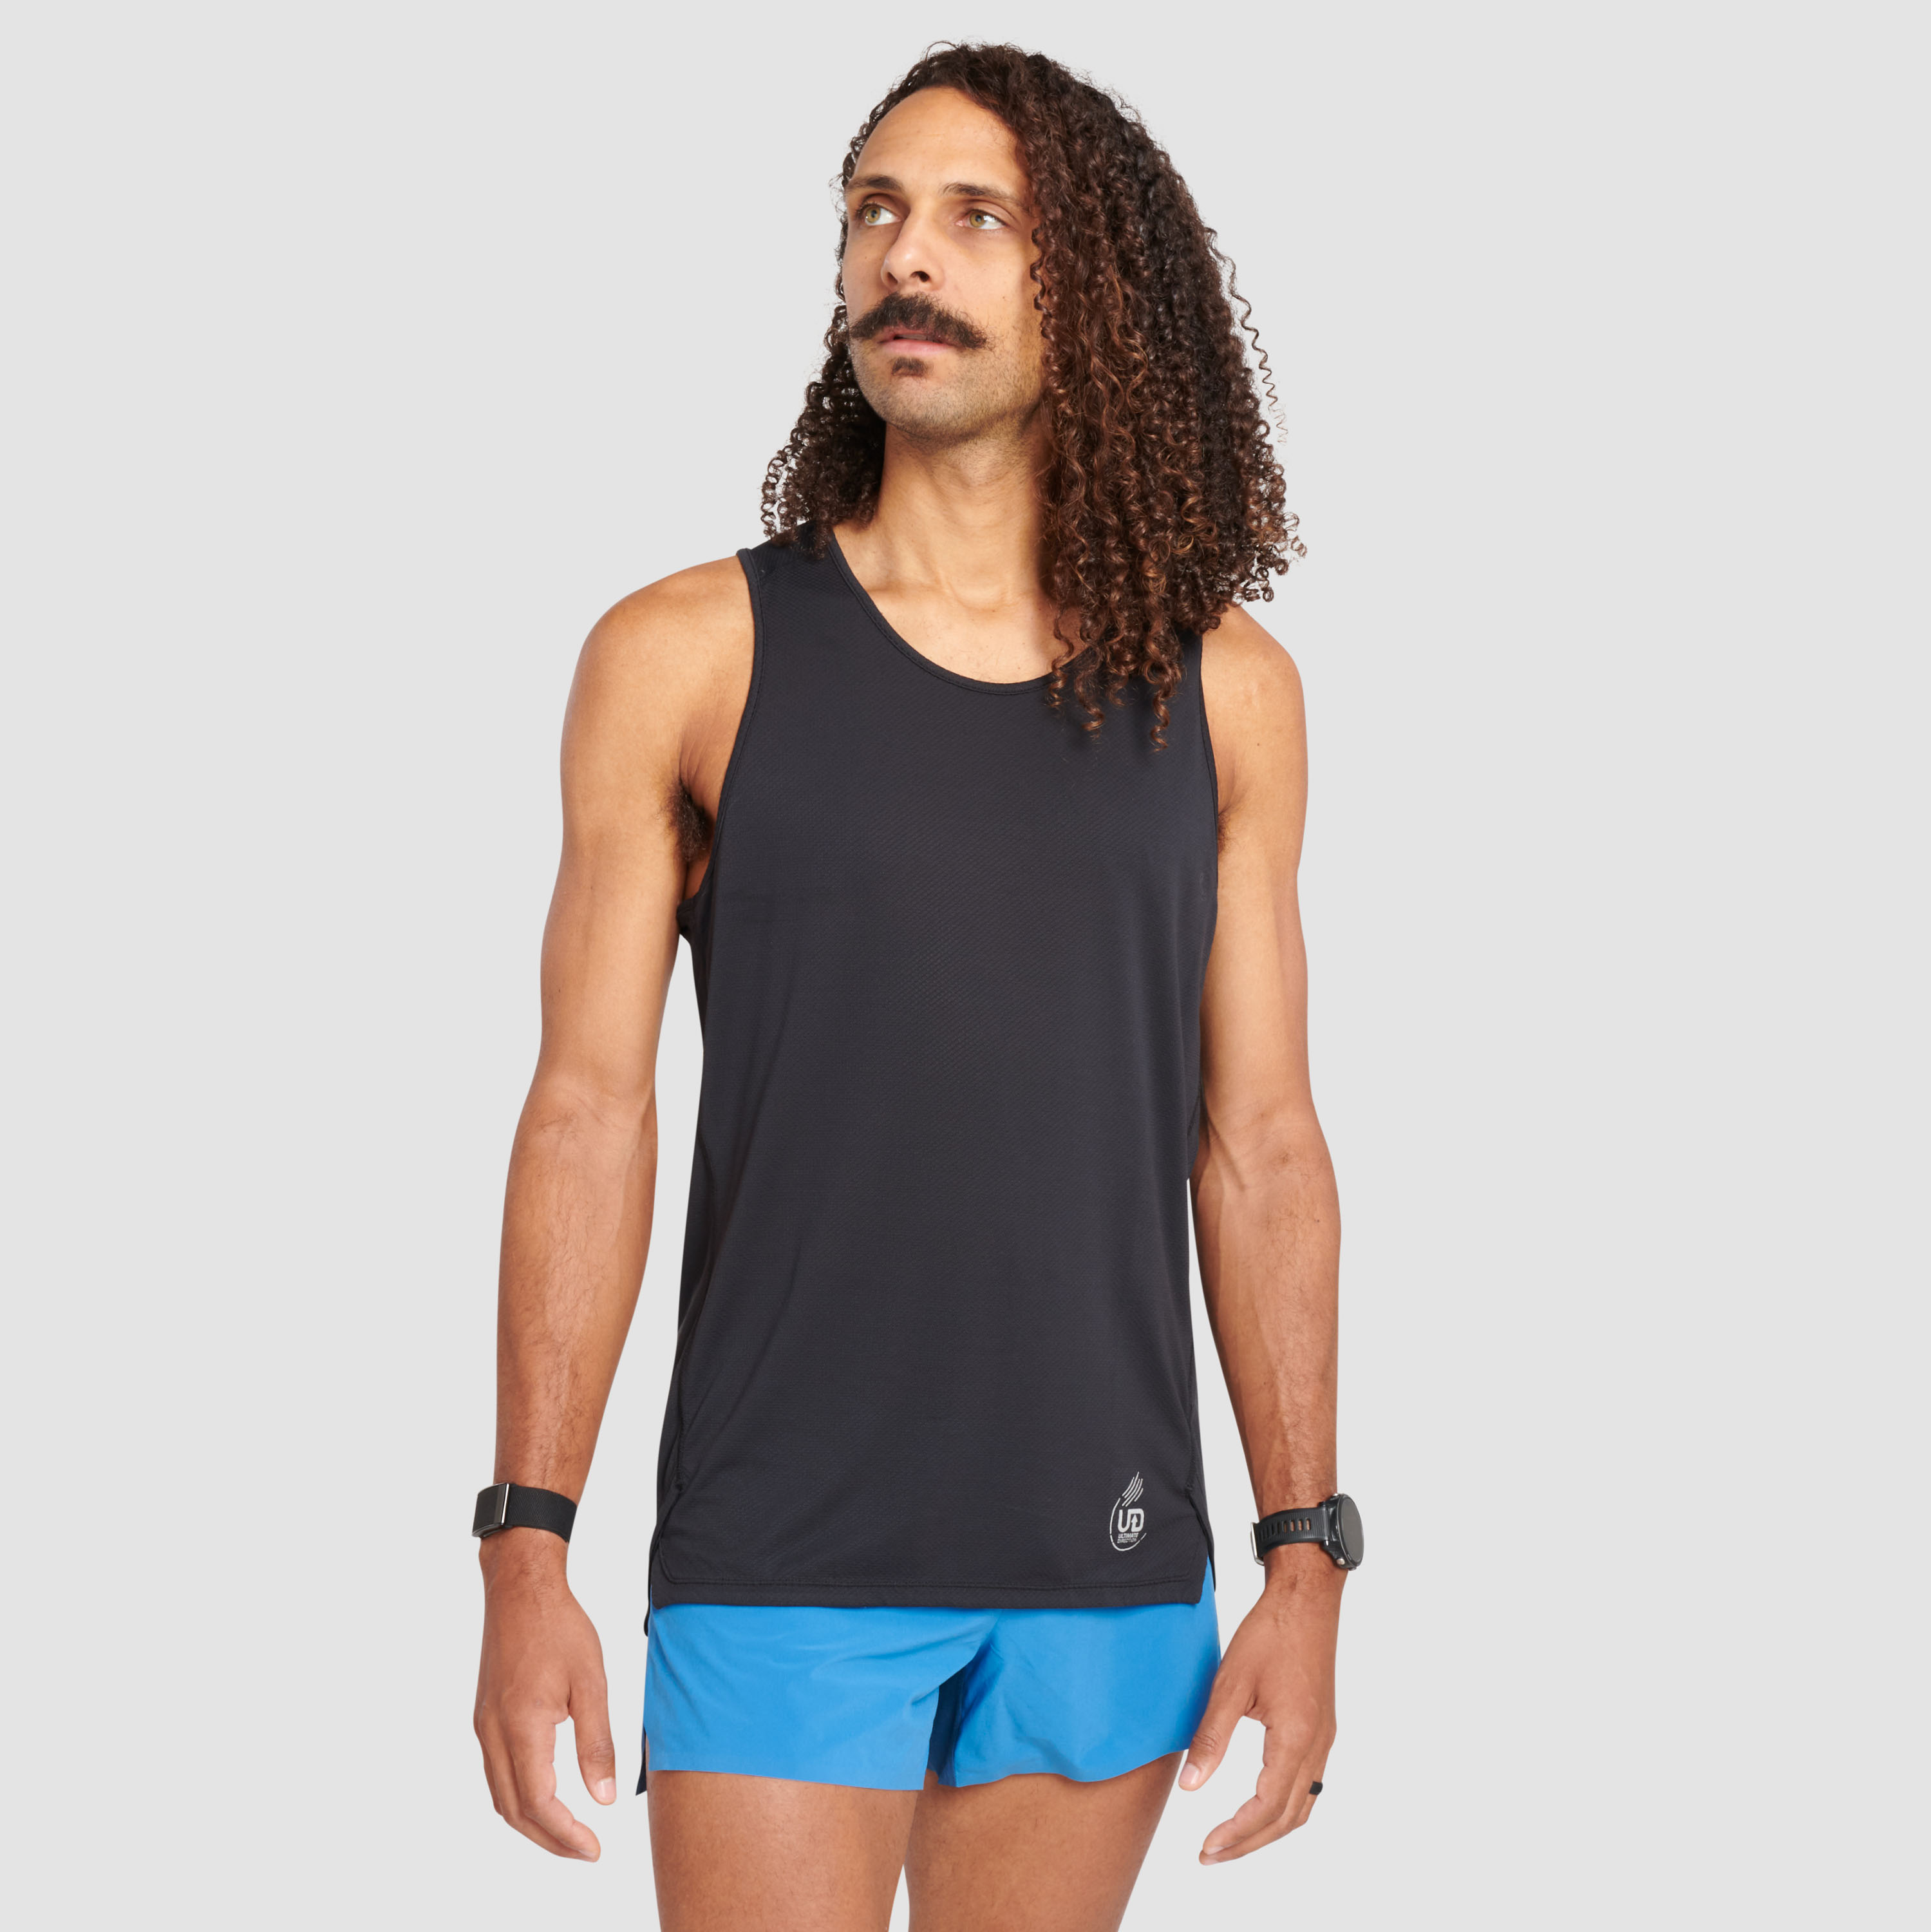 Ultimate Direction Men's Cumulus Tank Top in Onyx Size Small